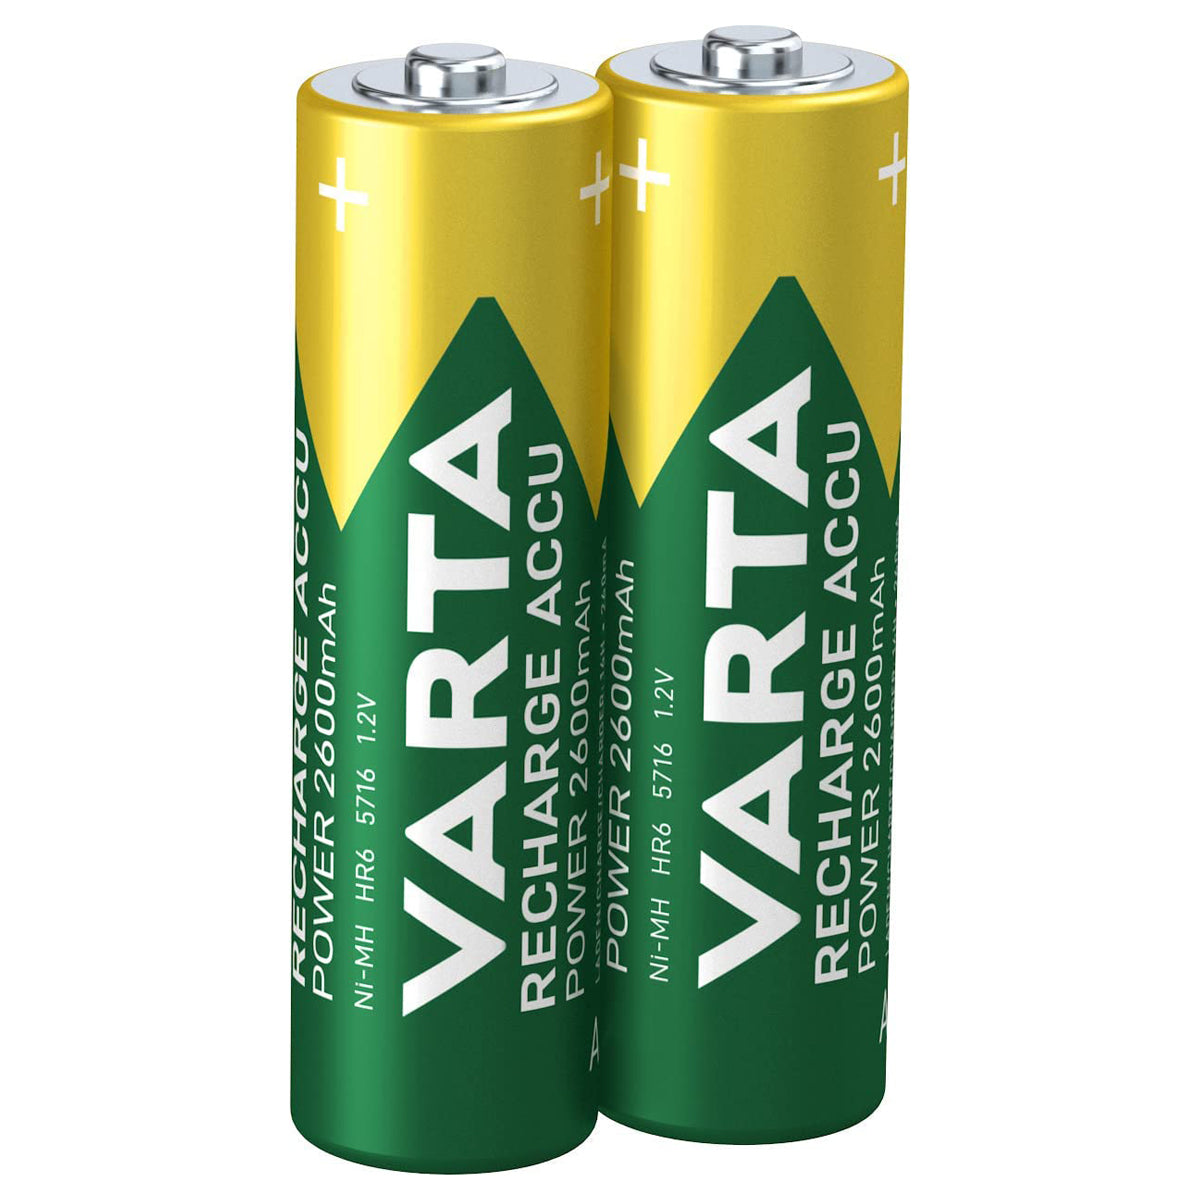 VARTA AA Rechargeable Accu Ready2Use rechargeable batteries pre-charged Mignon Ni-Mh pack of 2 2600mAh - rechargeable without memory effect, ready to use